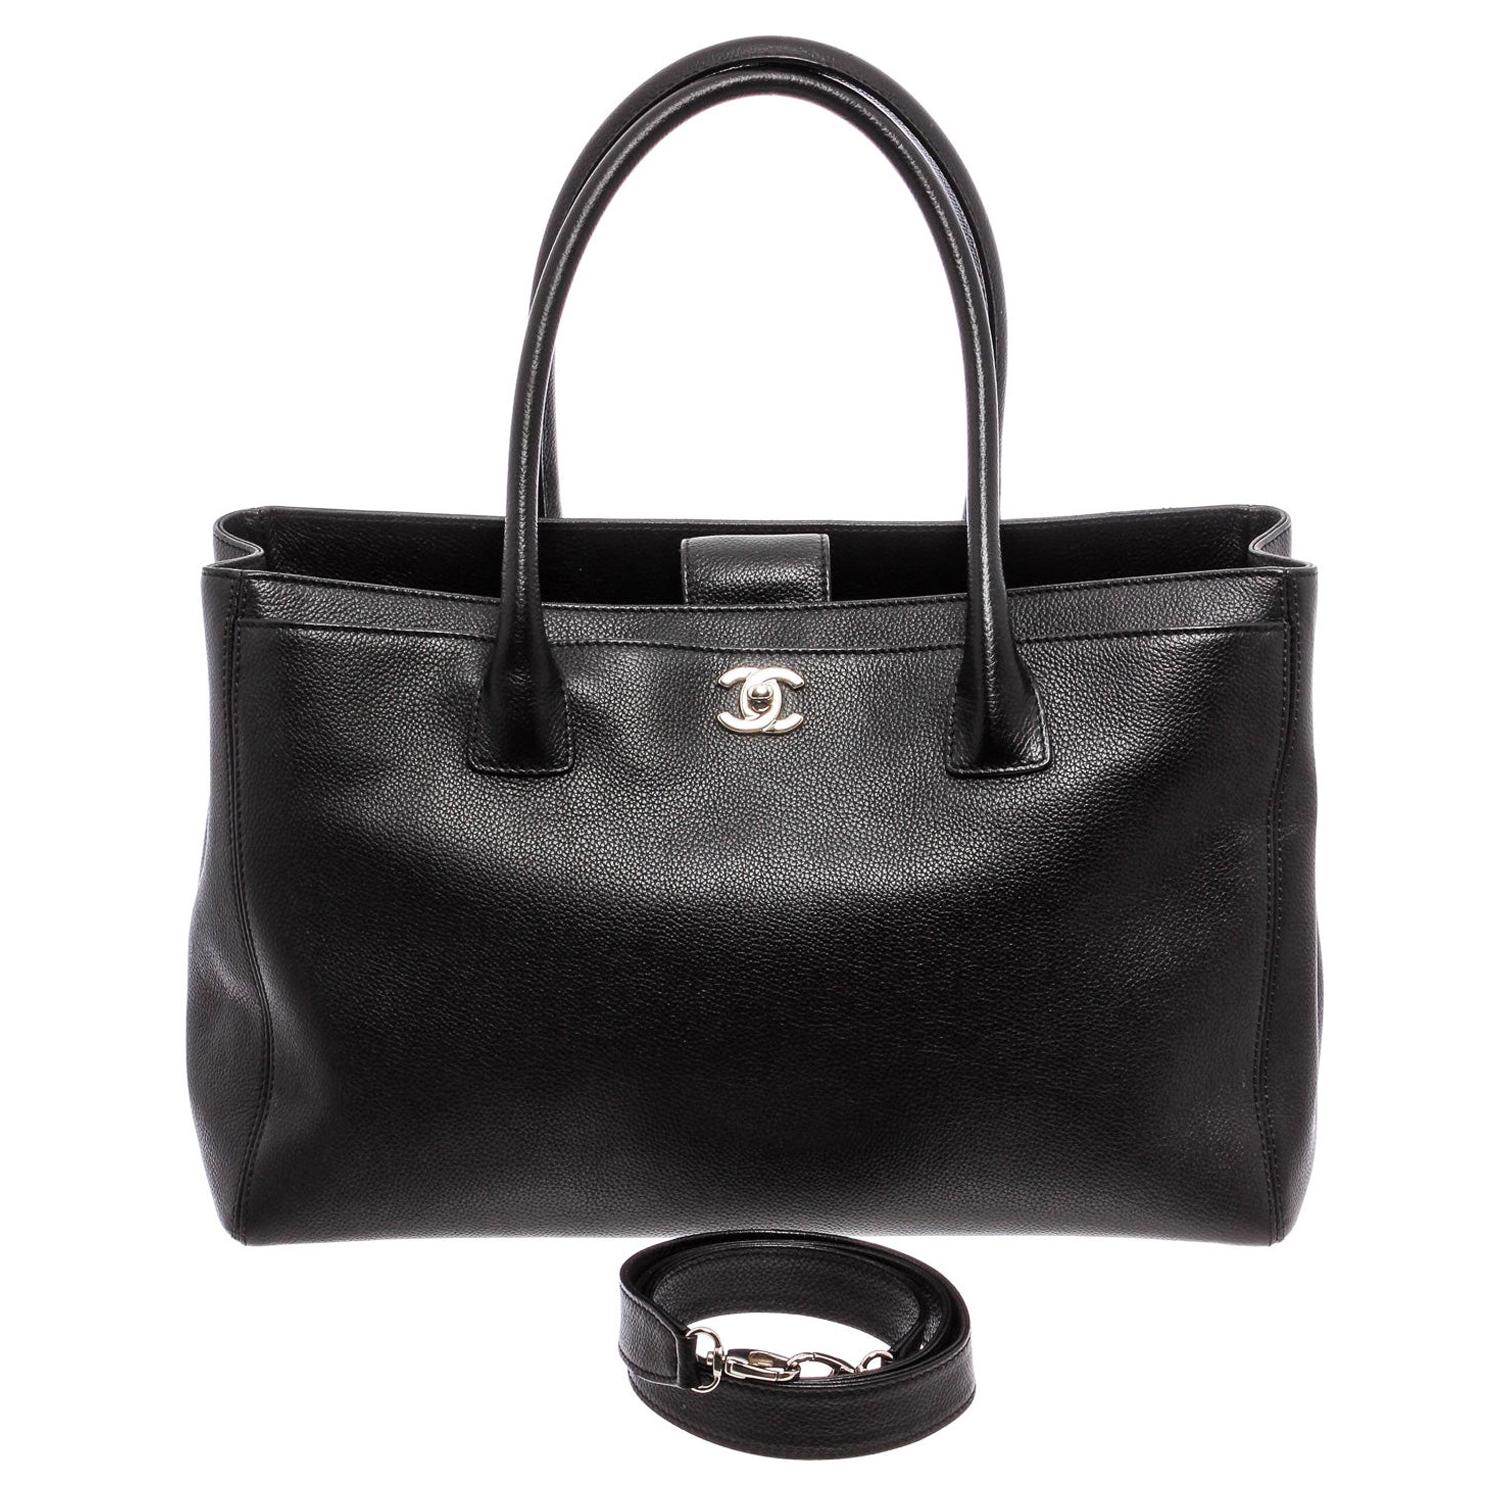 Chanel Black Leather Executive Cerf Tote w/Strap Bag 